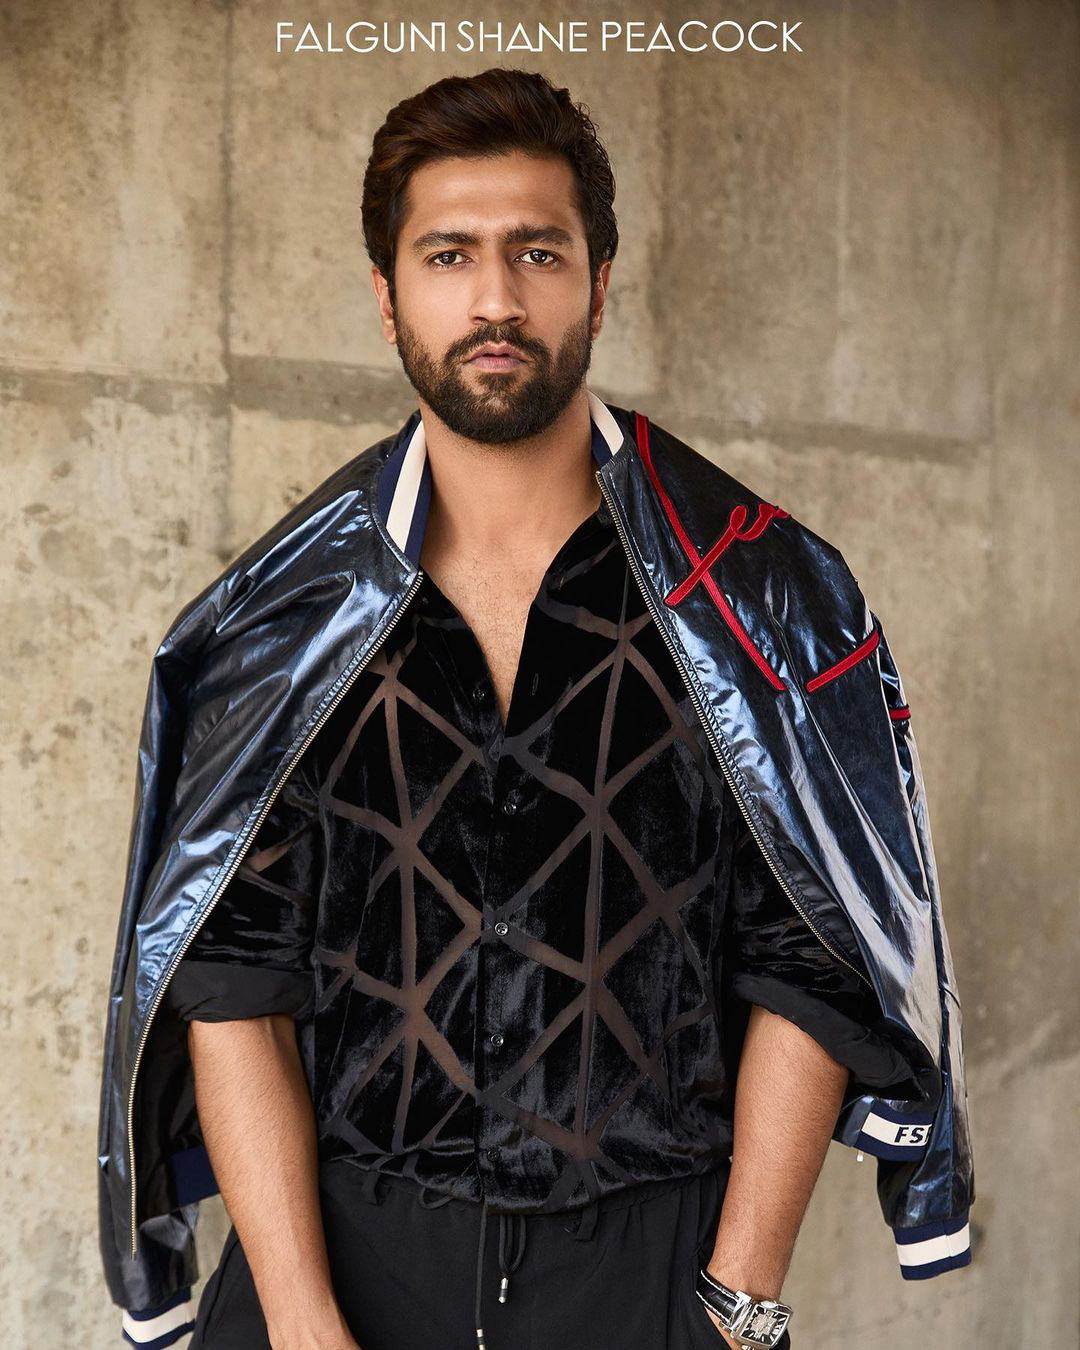 Vicky Kaushal Gracing the cover of The Peacock Magazine